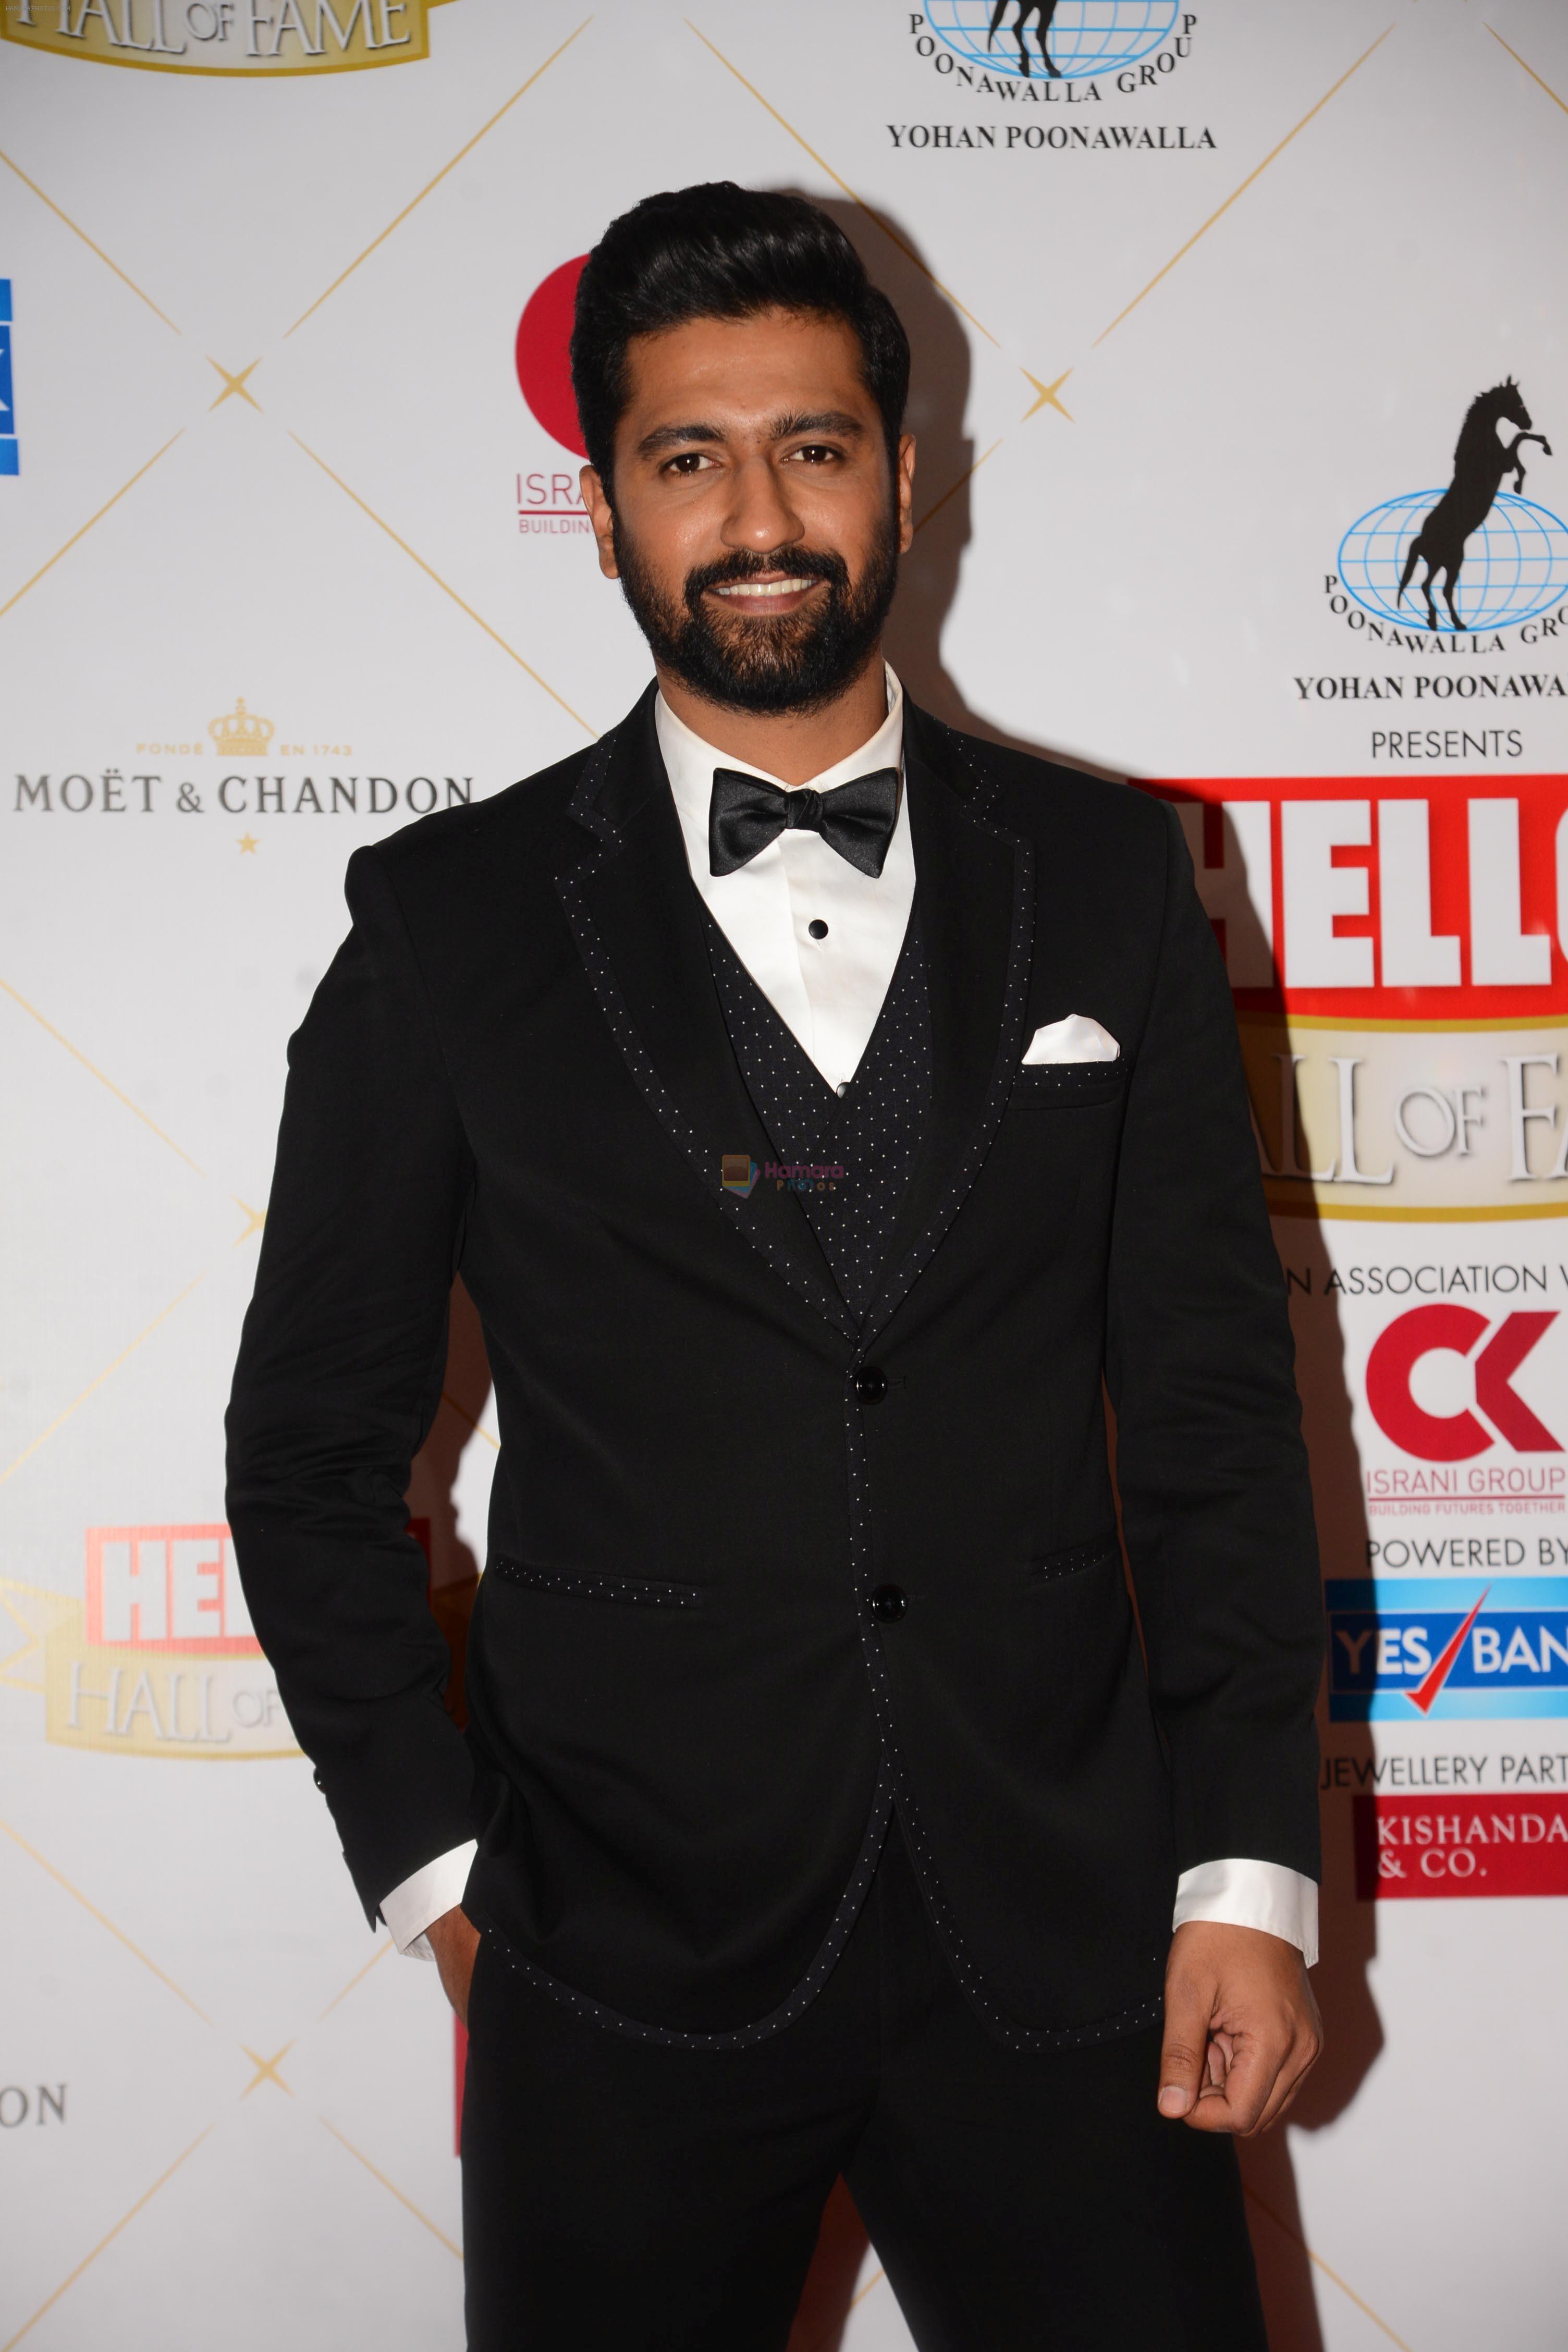 Vicky Kaushal at the Hello Hall of Fame Awards in St Regis hotel on 18th March 2019